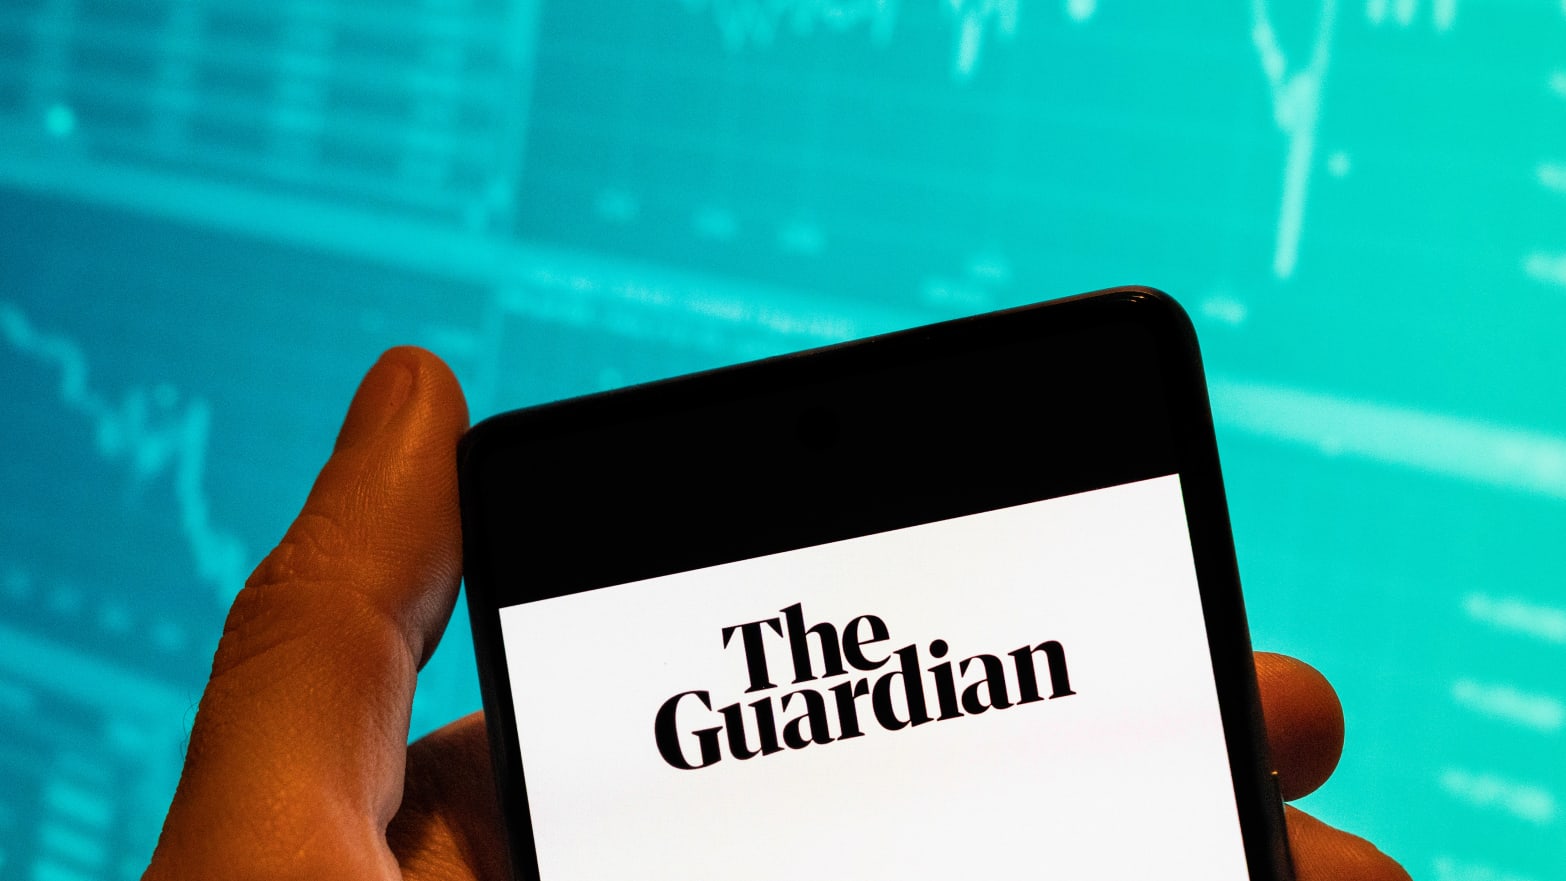 The Guardian logo on a smartphone.